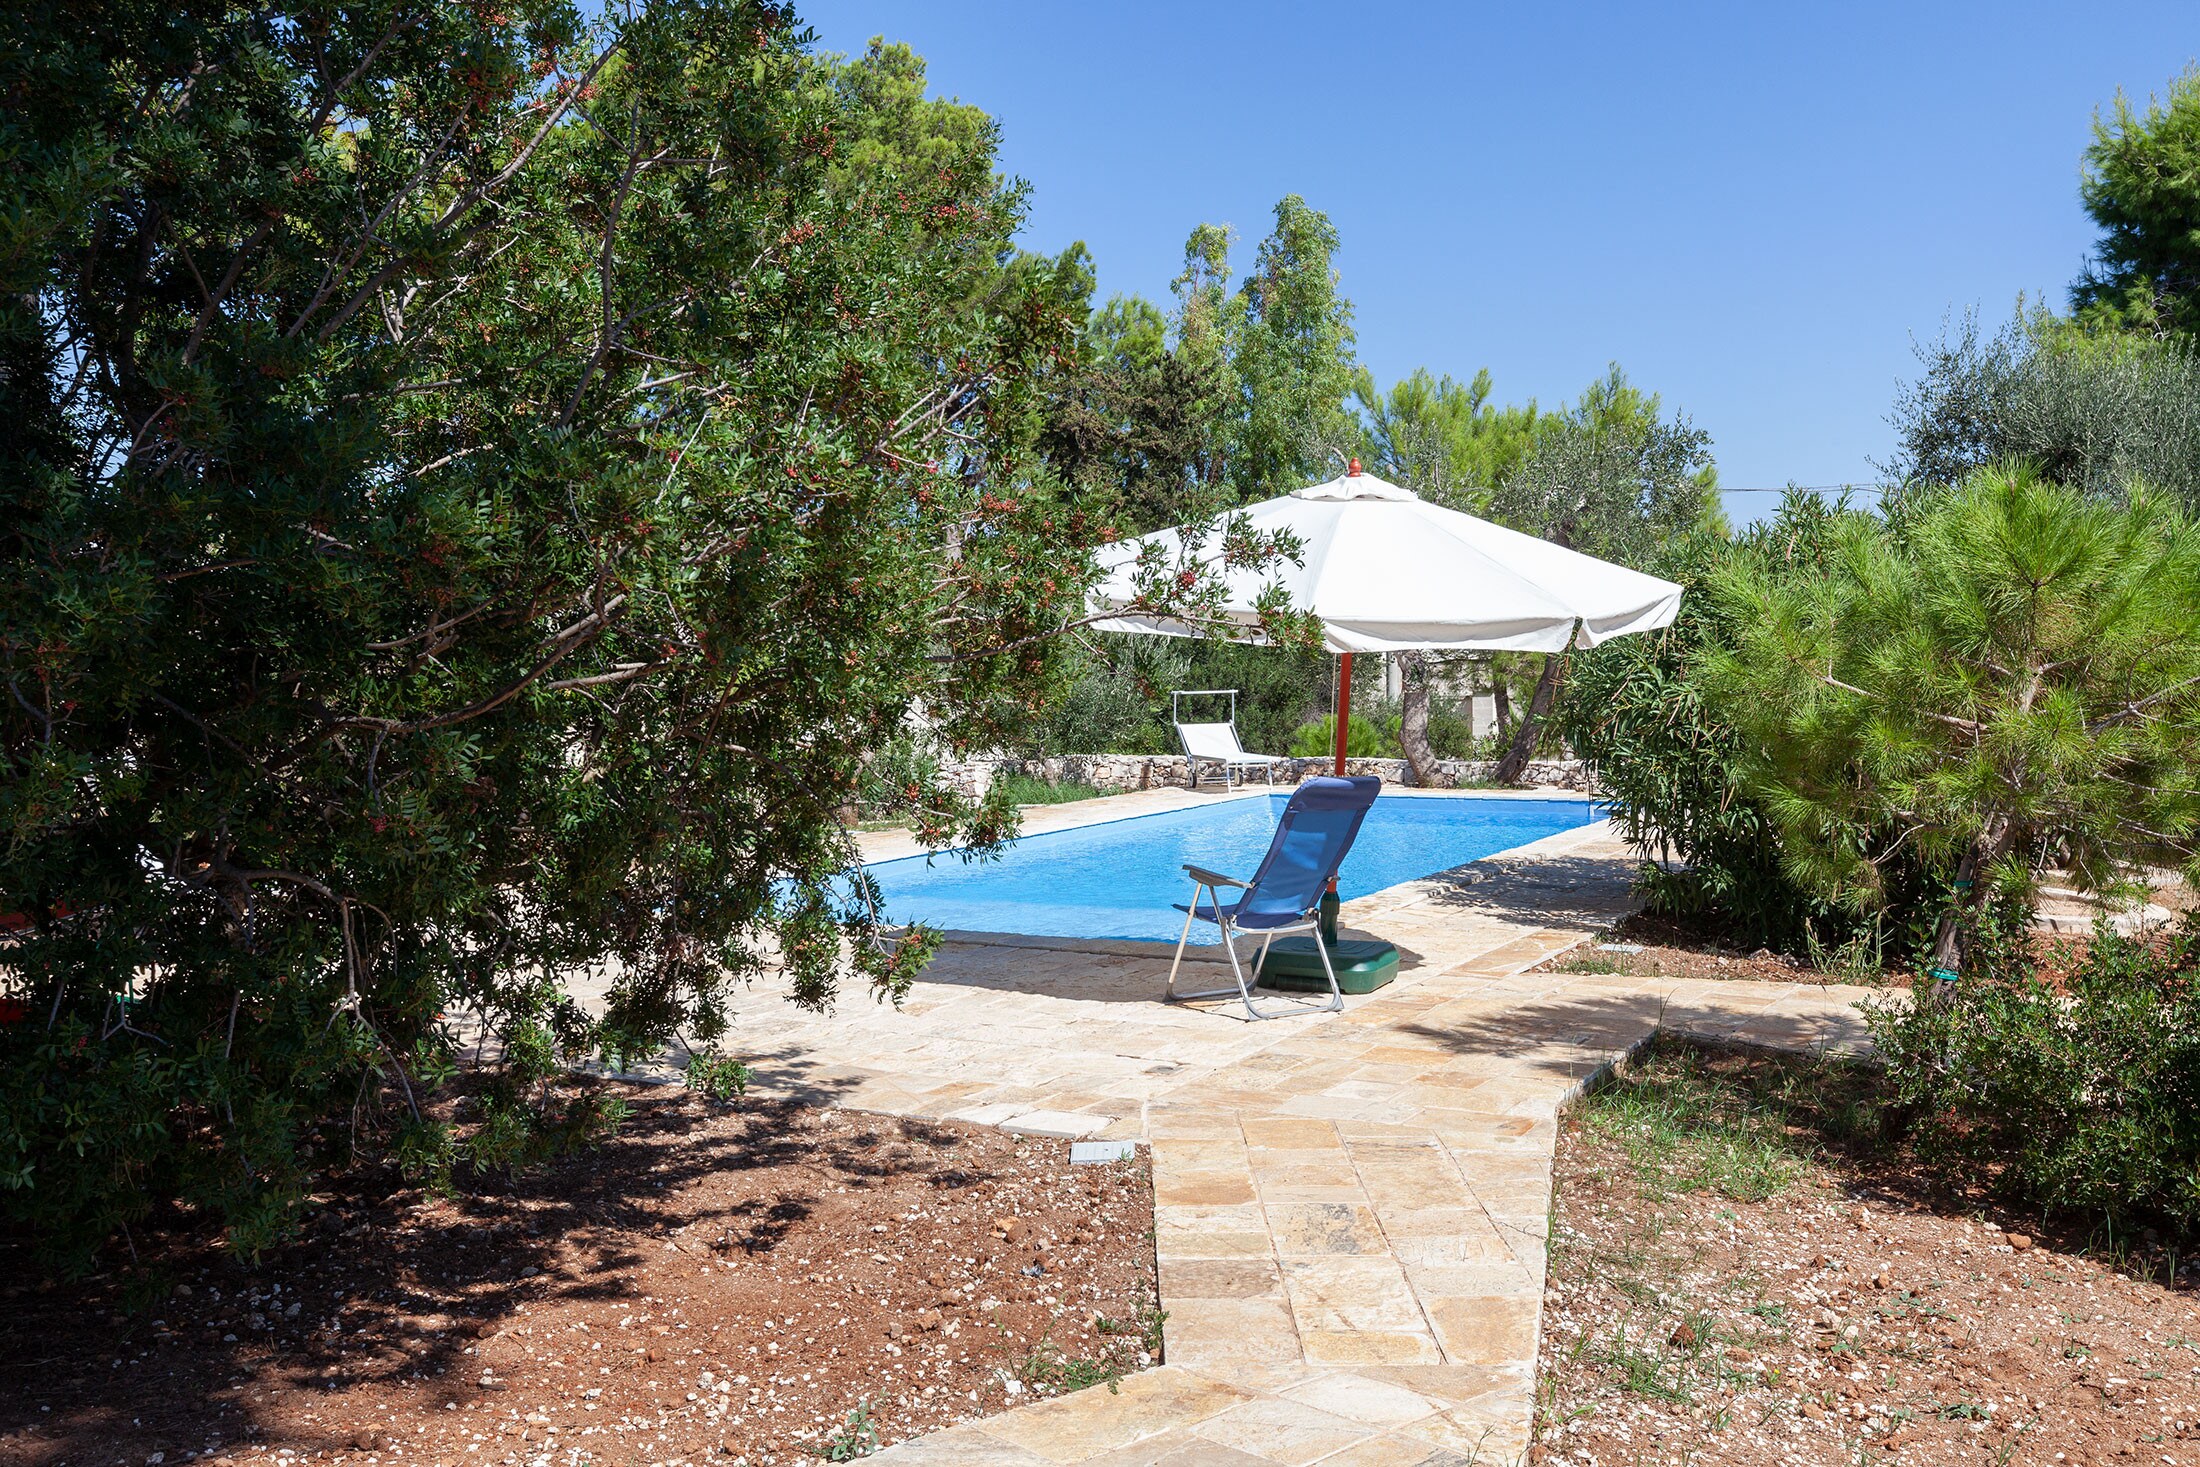 Property Image 1 - Villa with pool, beach within walking distance, S.P. in Bevagna, m280